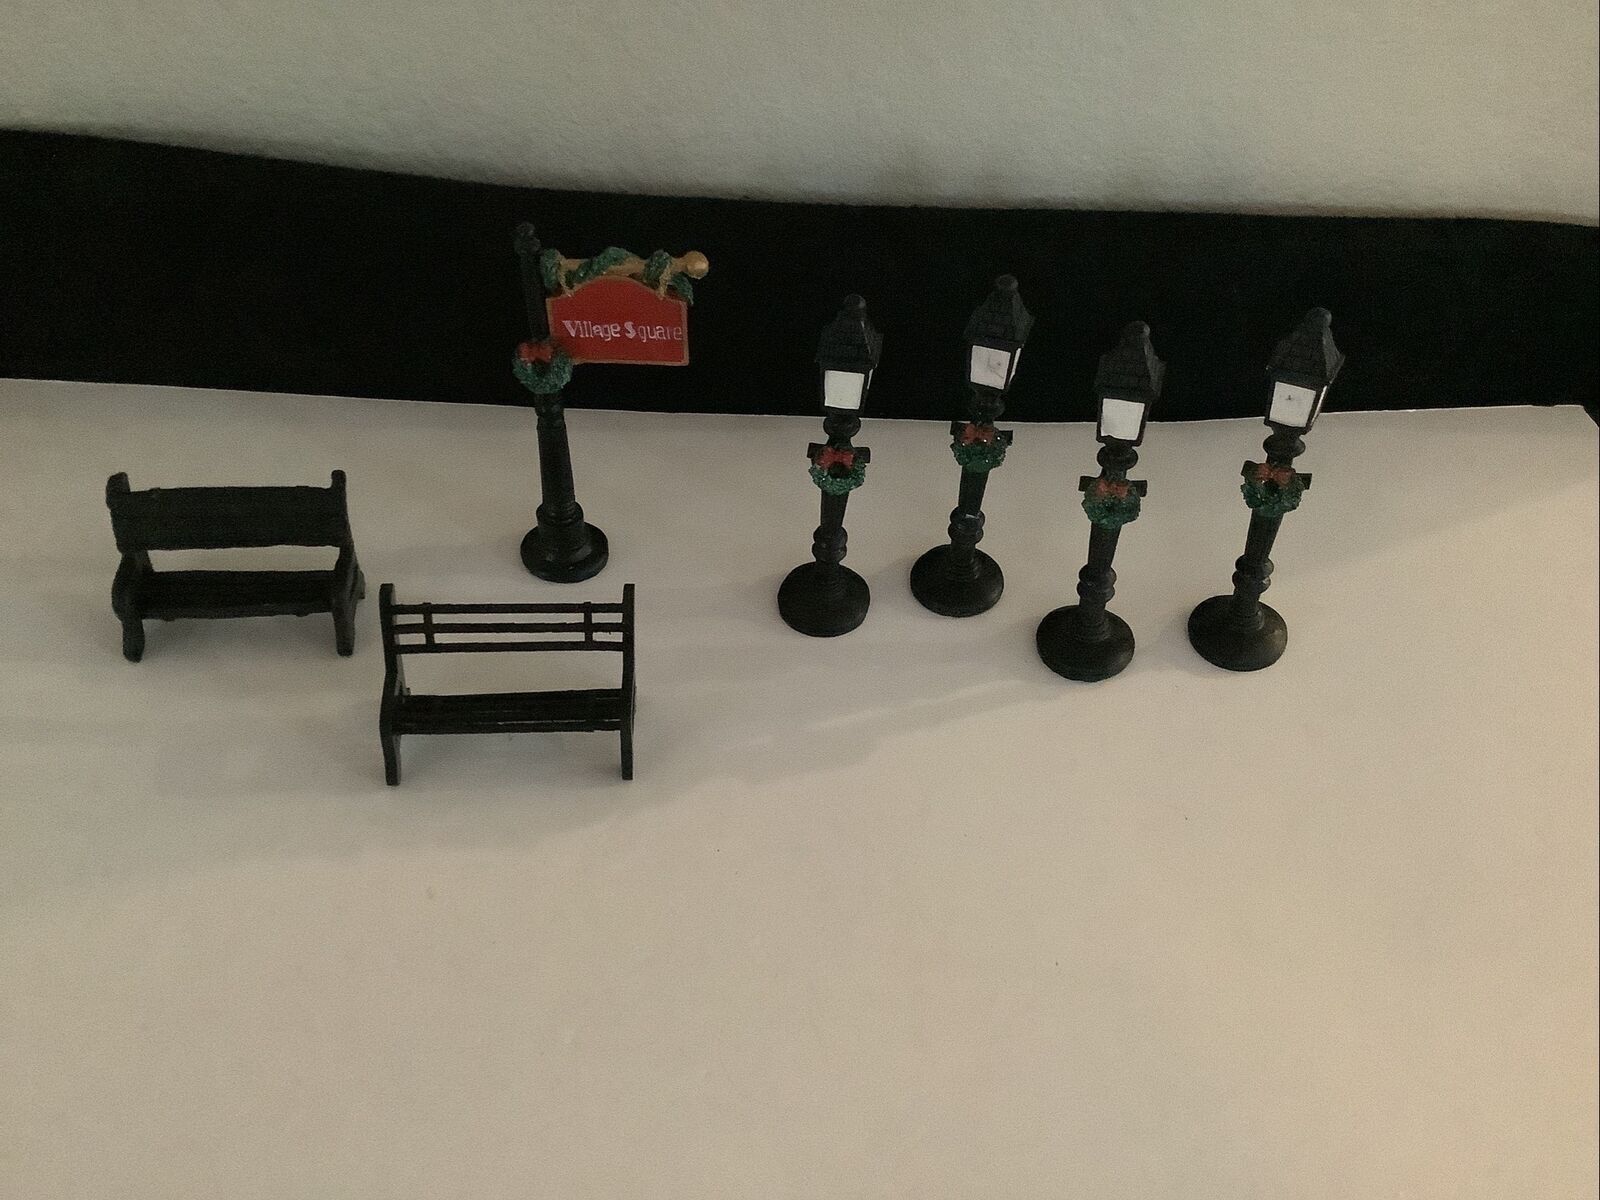 VTG 1997 Village Square Christmas Village Town Street Lamps, Benches & VG Sign